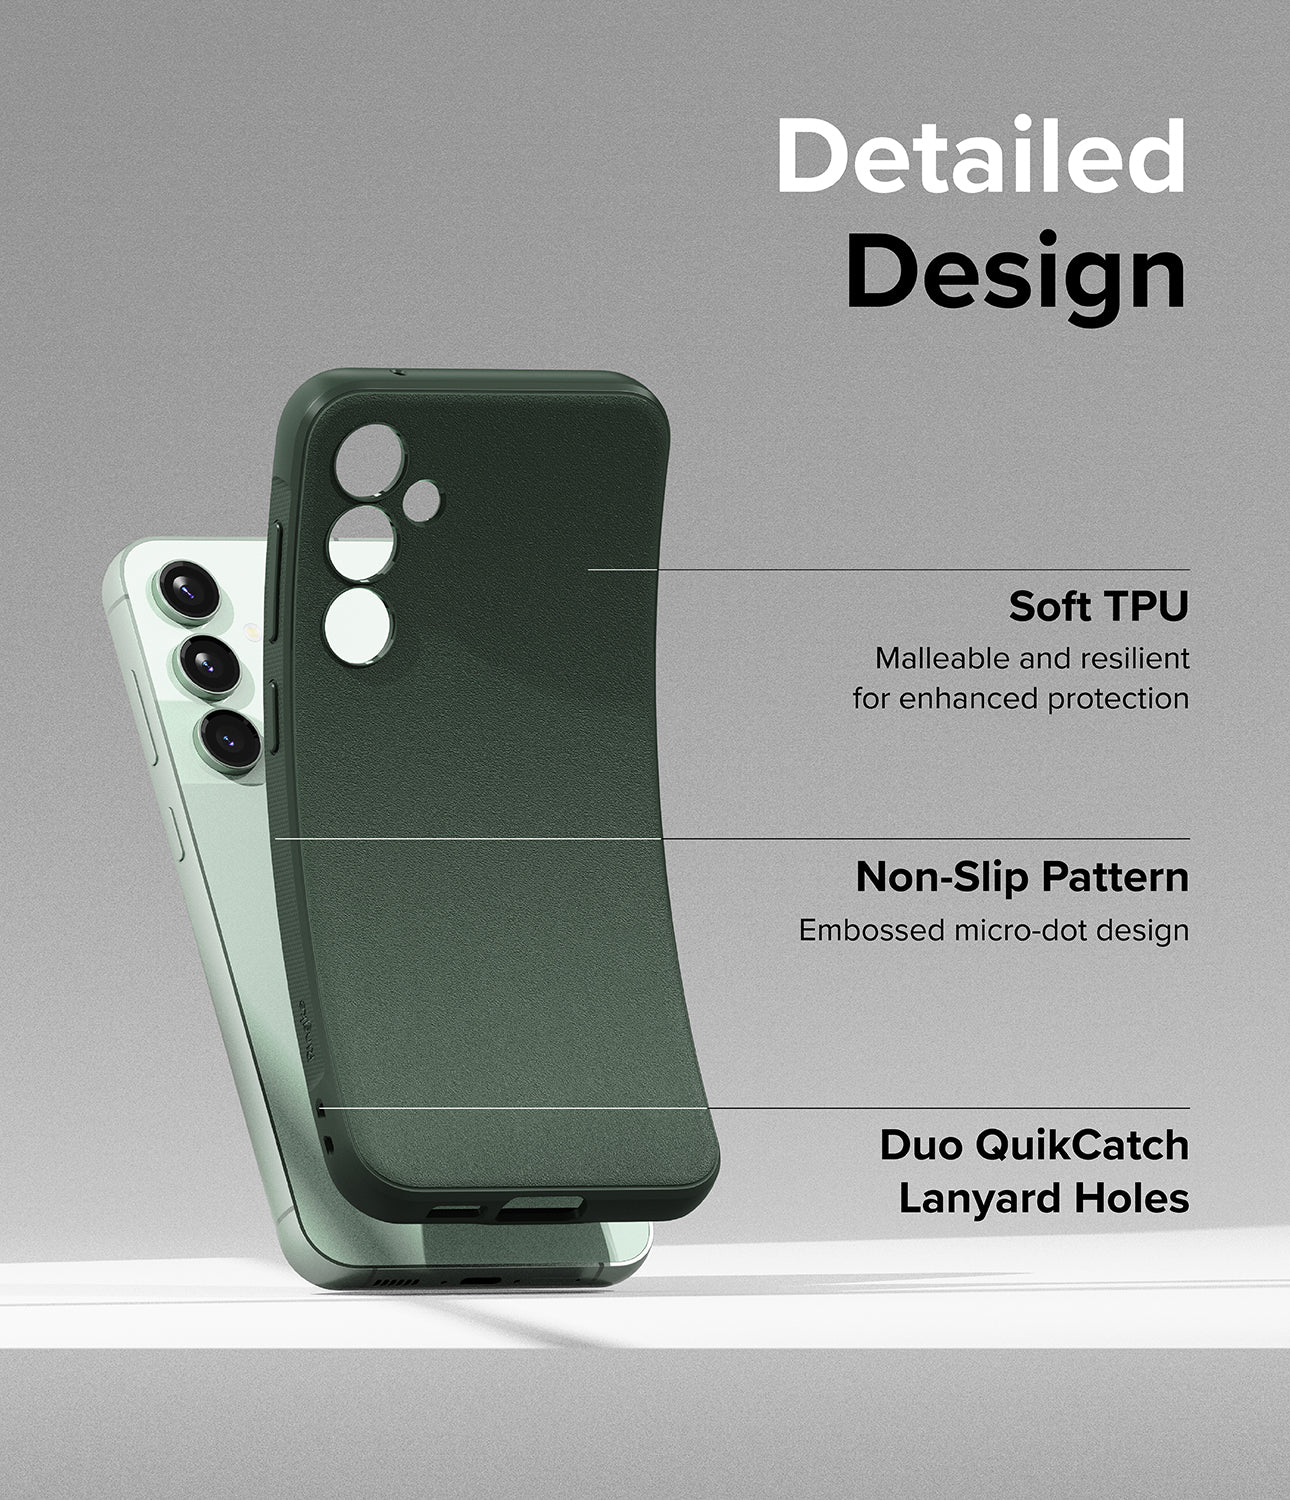 Galaxy S23 FE Case | Onyx-Dark Green - Detailed Design. Malleable and resilient for enhanced protection with Soft TPU. Embossed micro-dot design with Non-Slip Pattern. Duo QuikCatch Lanyard Holes